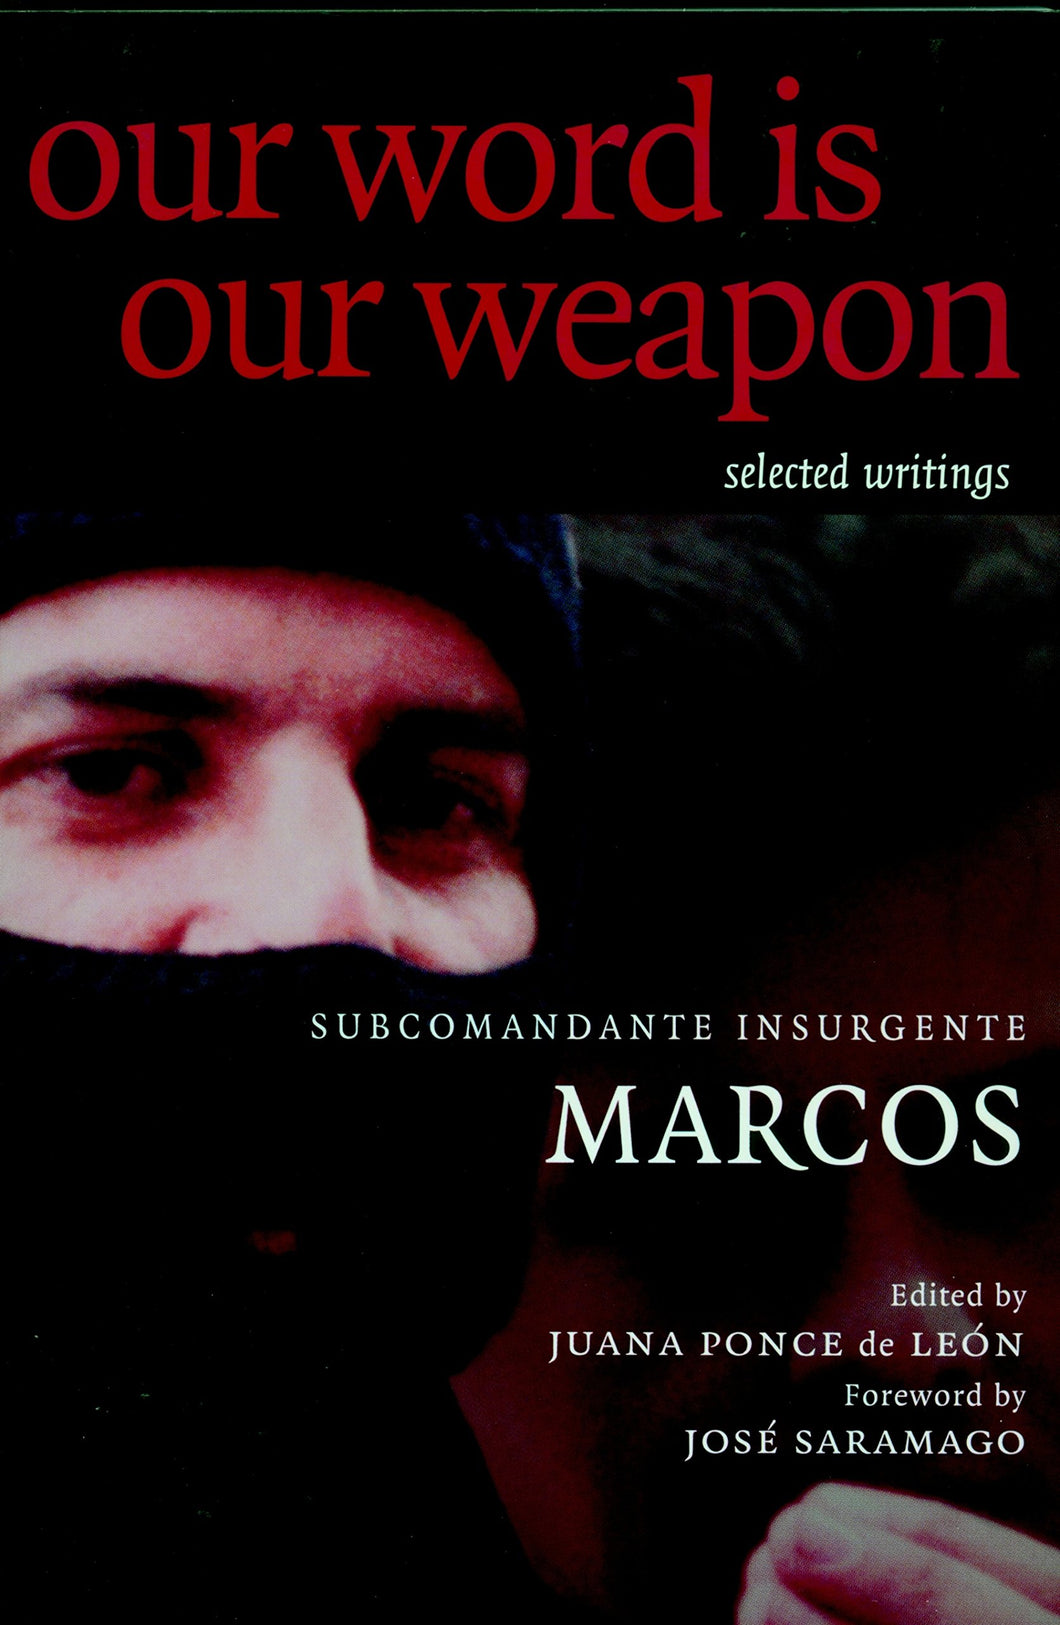 Our Word is Our Weapon: Selected Writings  by Subcomandante Marcos